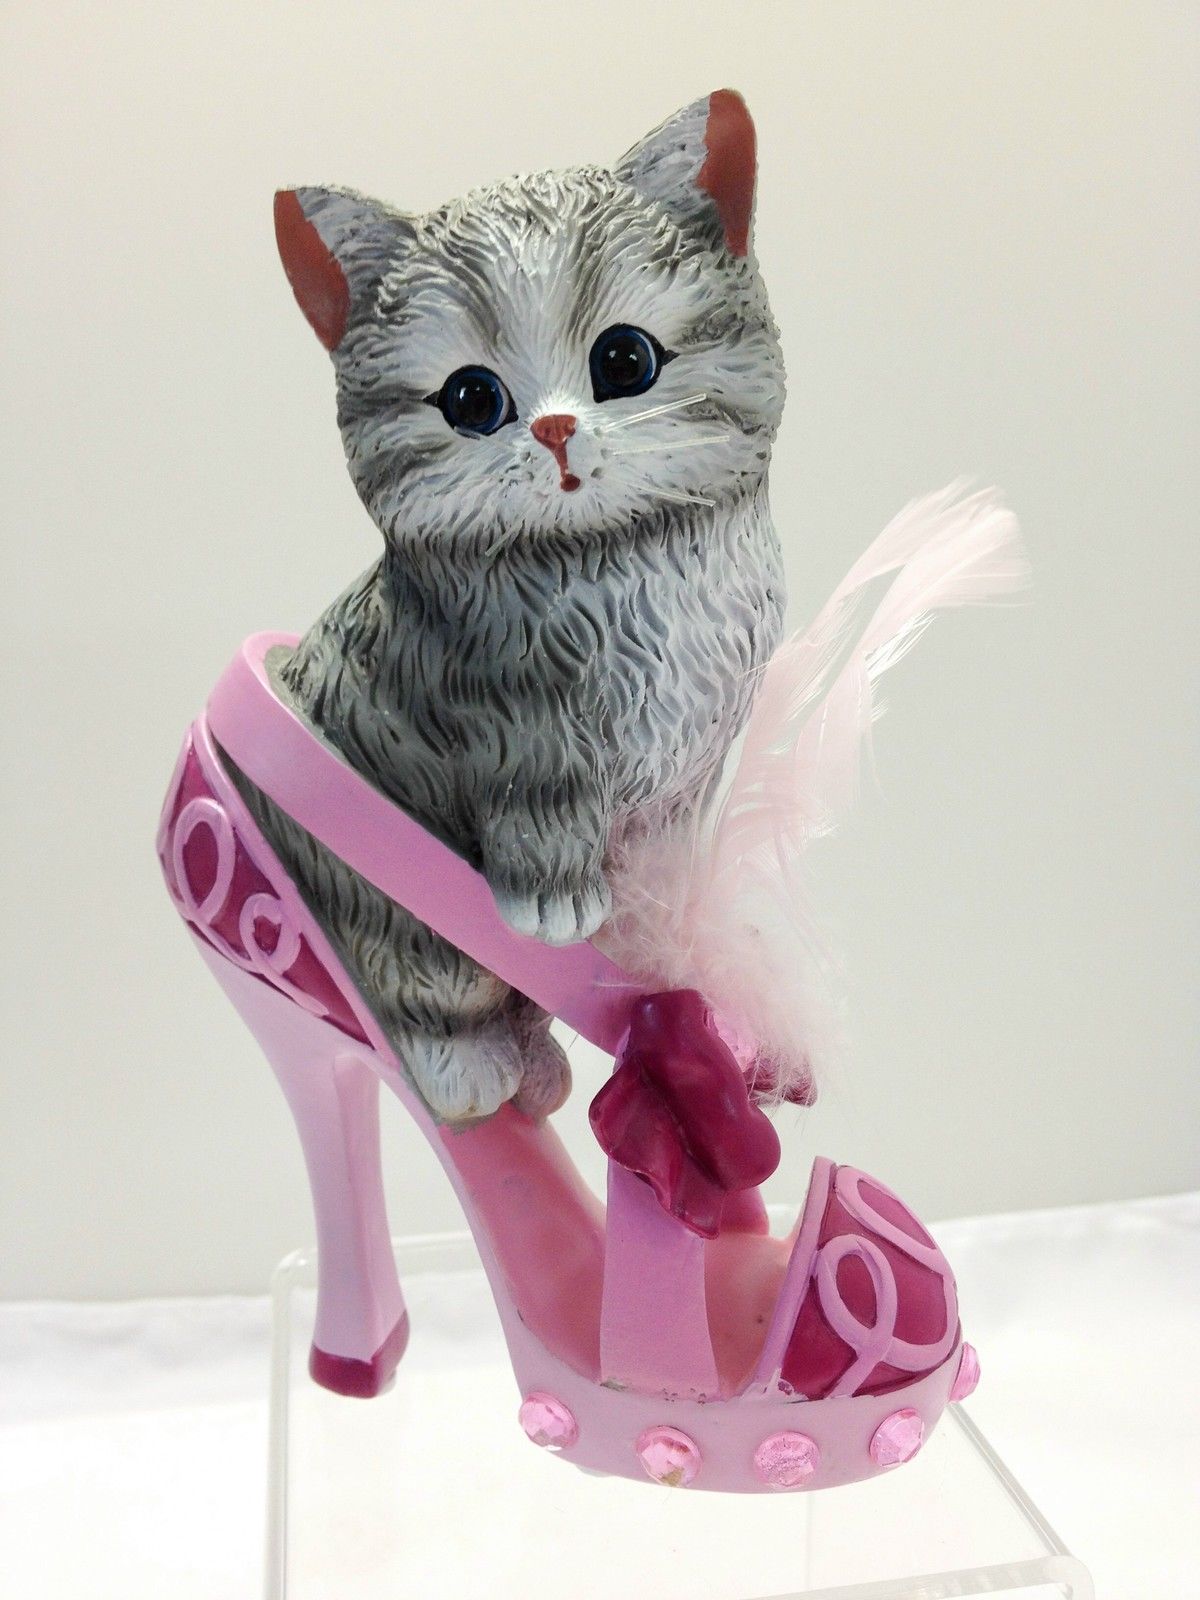 https://www.enchantedtreasuresgifts.com/wp-content/uploads/imported/8/Furry-Supportive-for-Hope-Kitten-Cat-in-a-Shoe-Figurine-Bradford-Exchange-401121611388.JPG